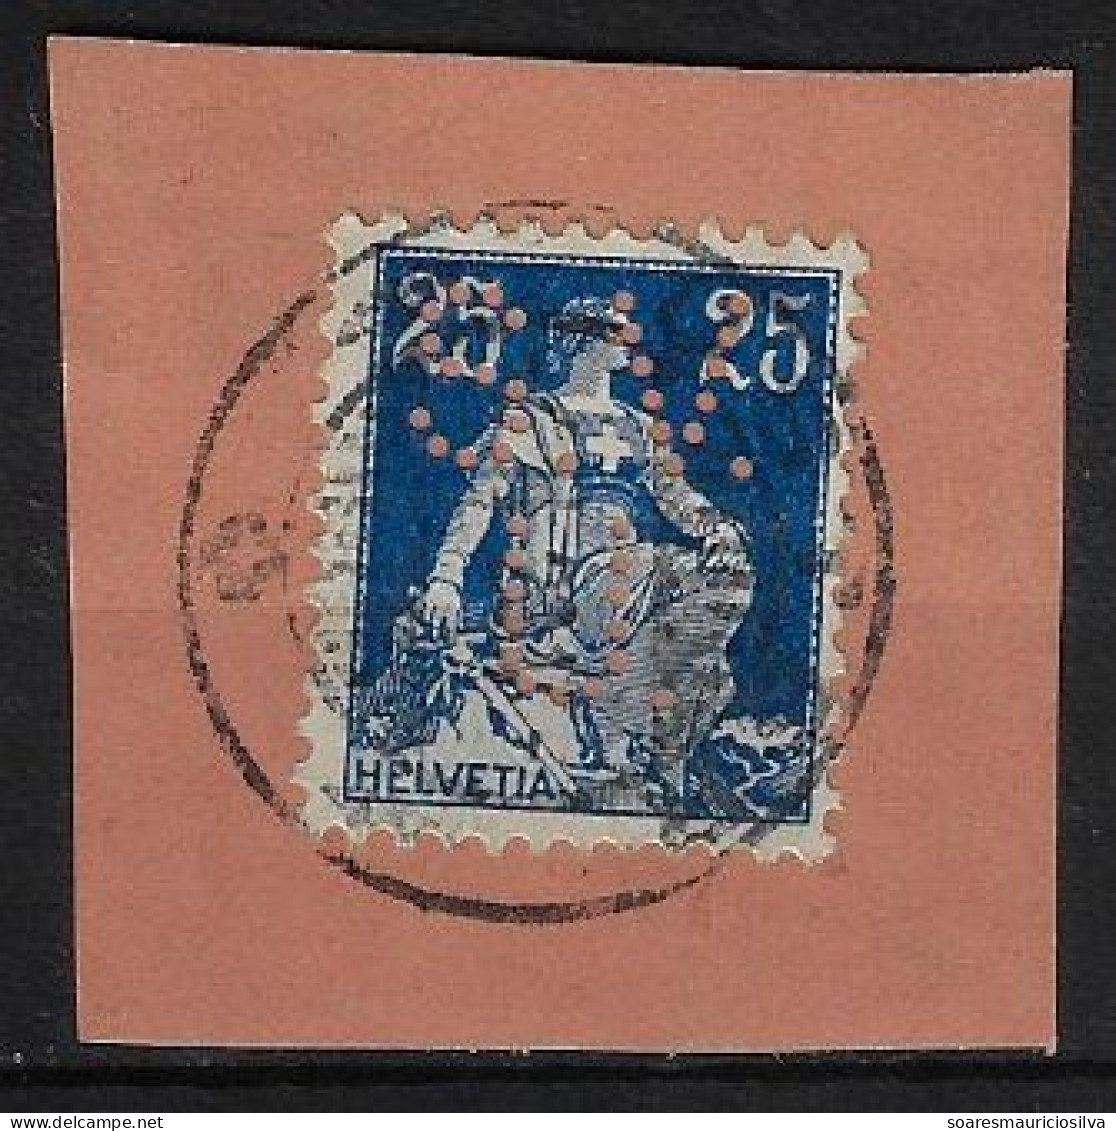 Switzerland 1904/1931 Cover Fragment Stamp With Perfin S.V./U. By Schweizerische Volksbank From Ulster Lochung Perfore - Perforés